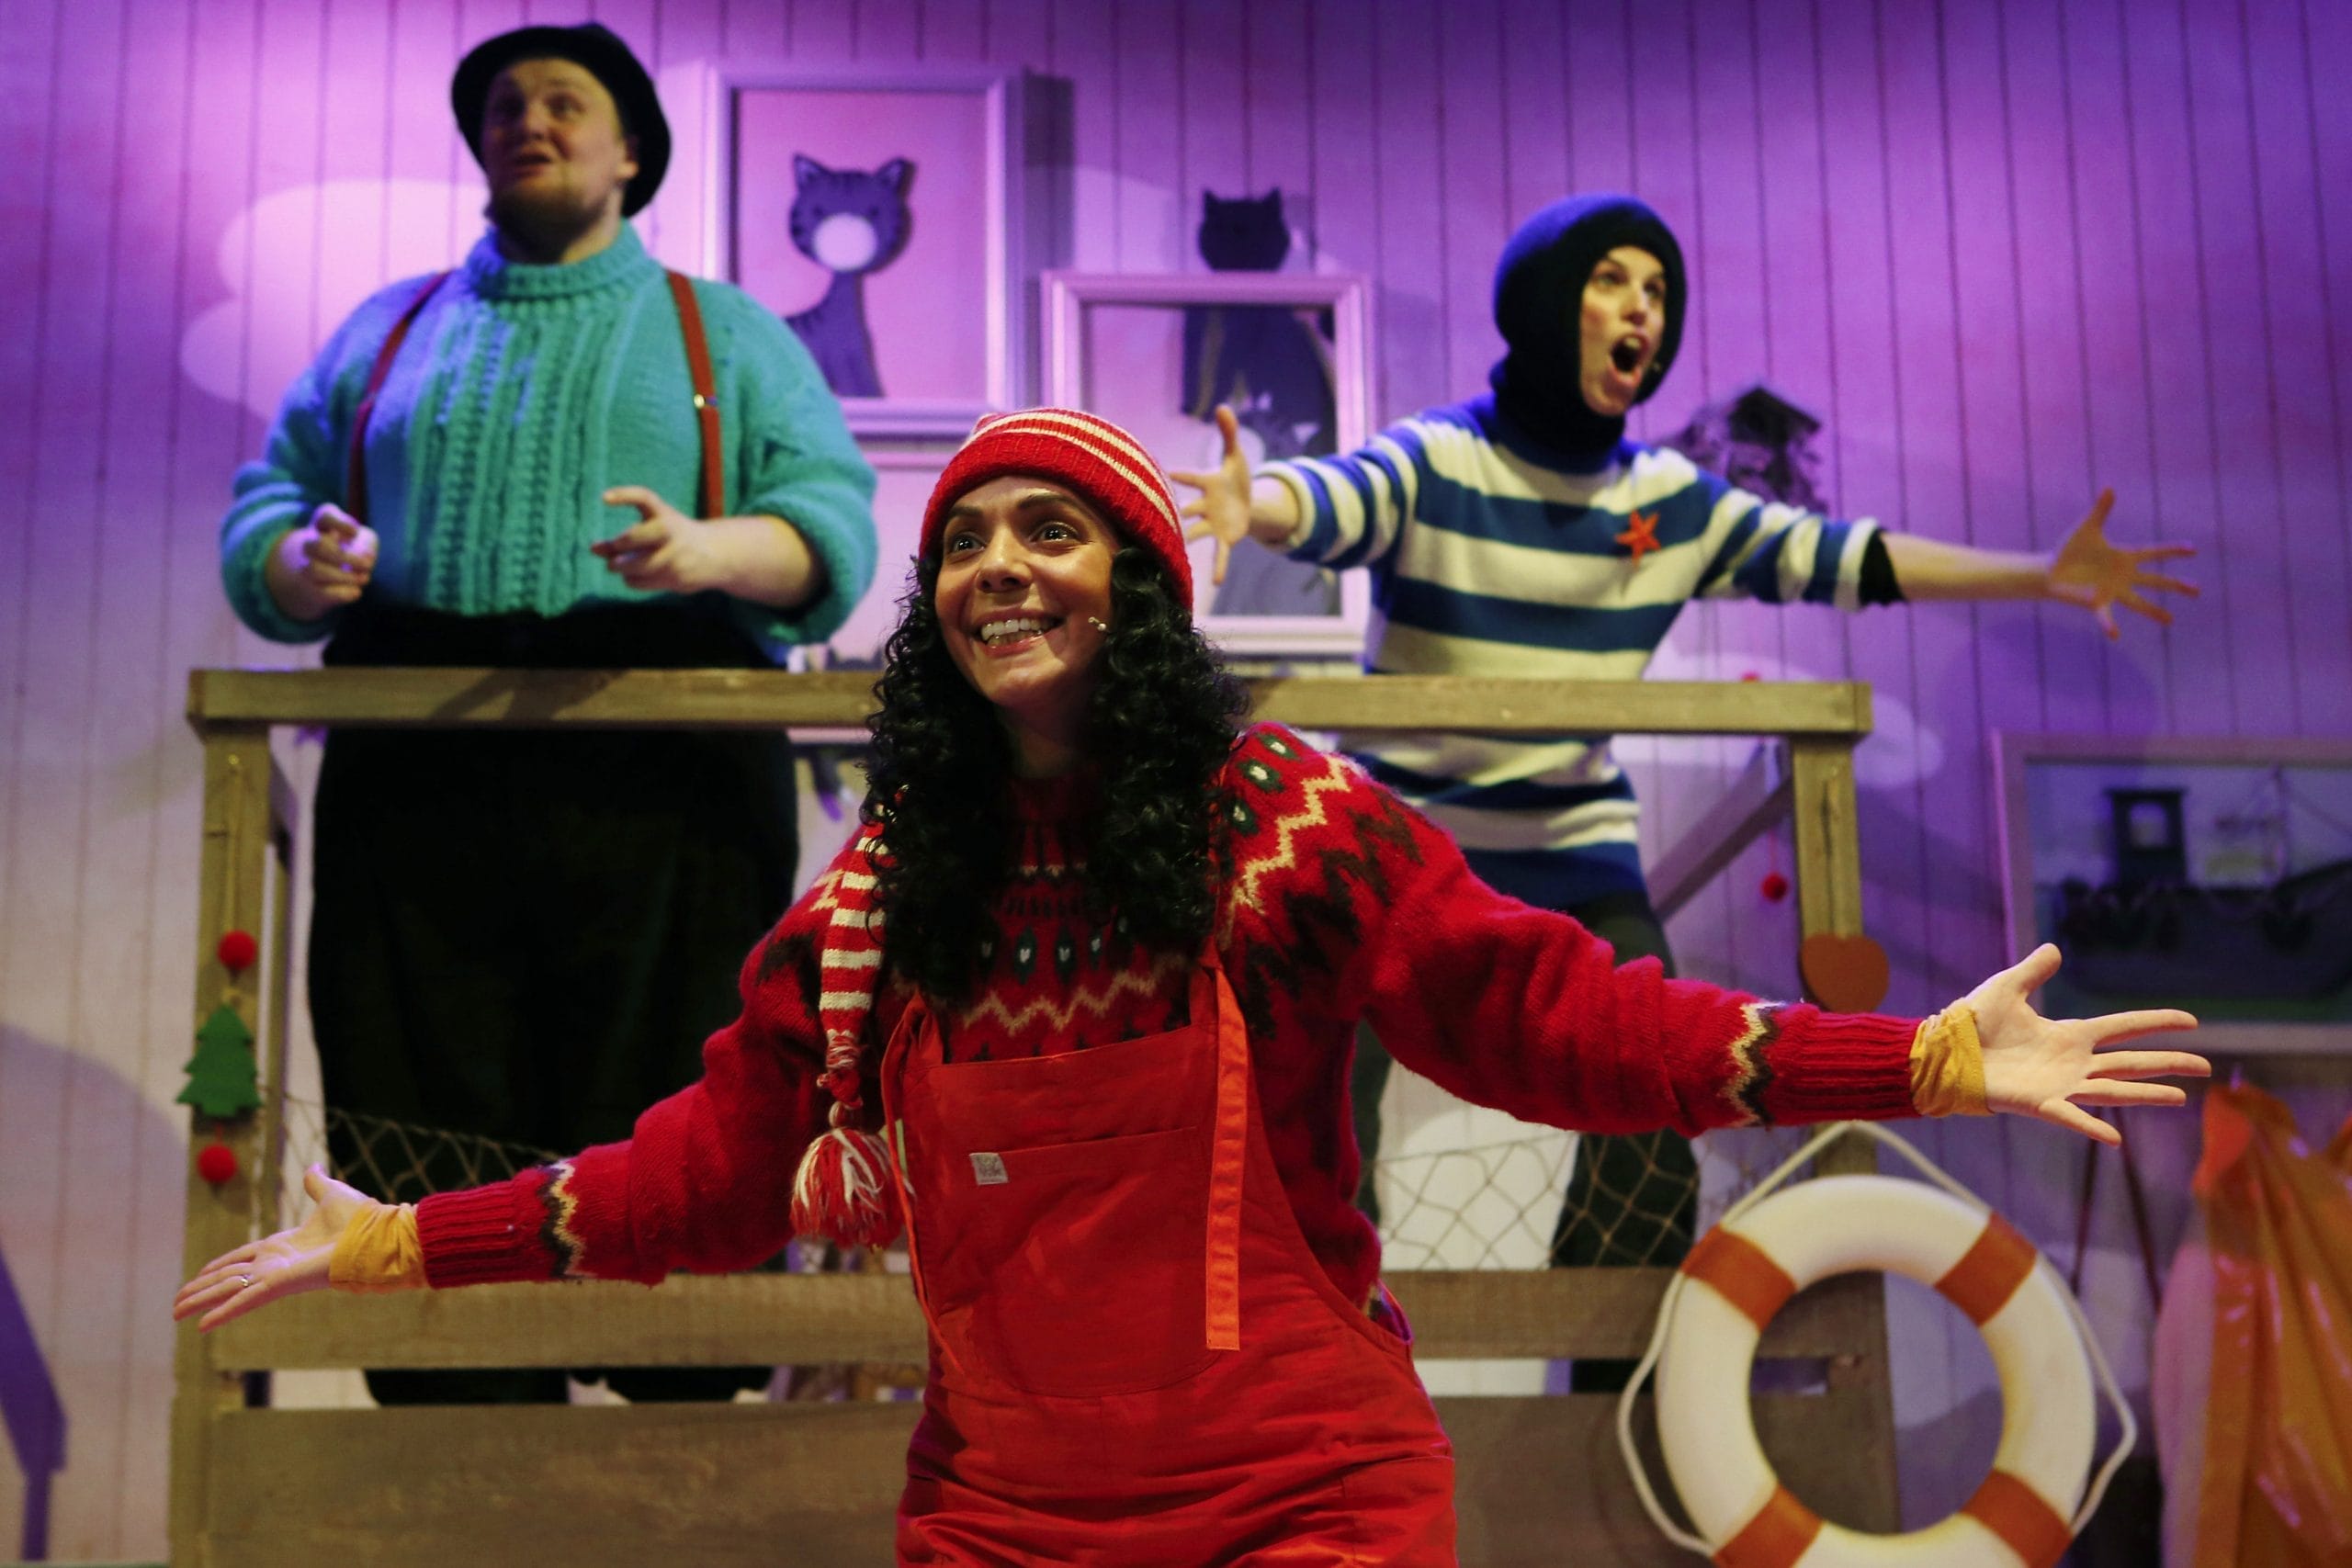 A lady wear red dungarees and a red beanie hat, with long dark hair stands at the front of the stage with two men stood at the back for the stage, one wearing a green shirt and braces, the other in a striped blue and white top.